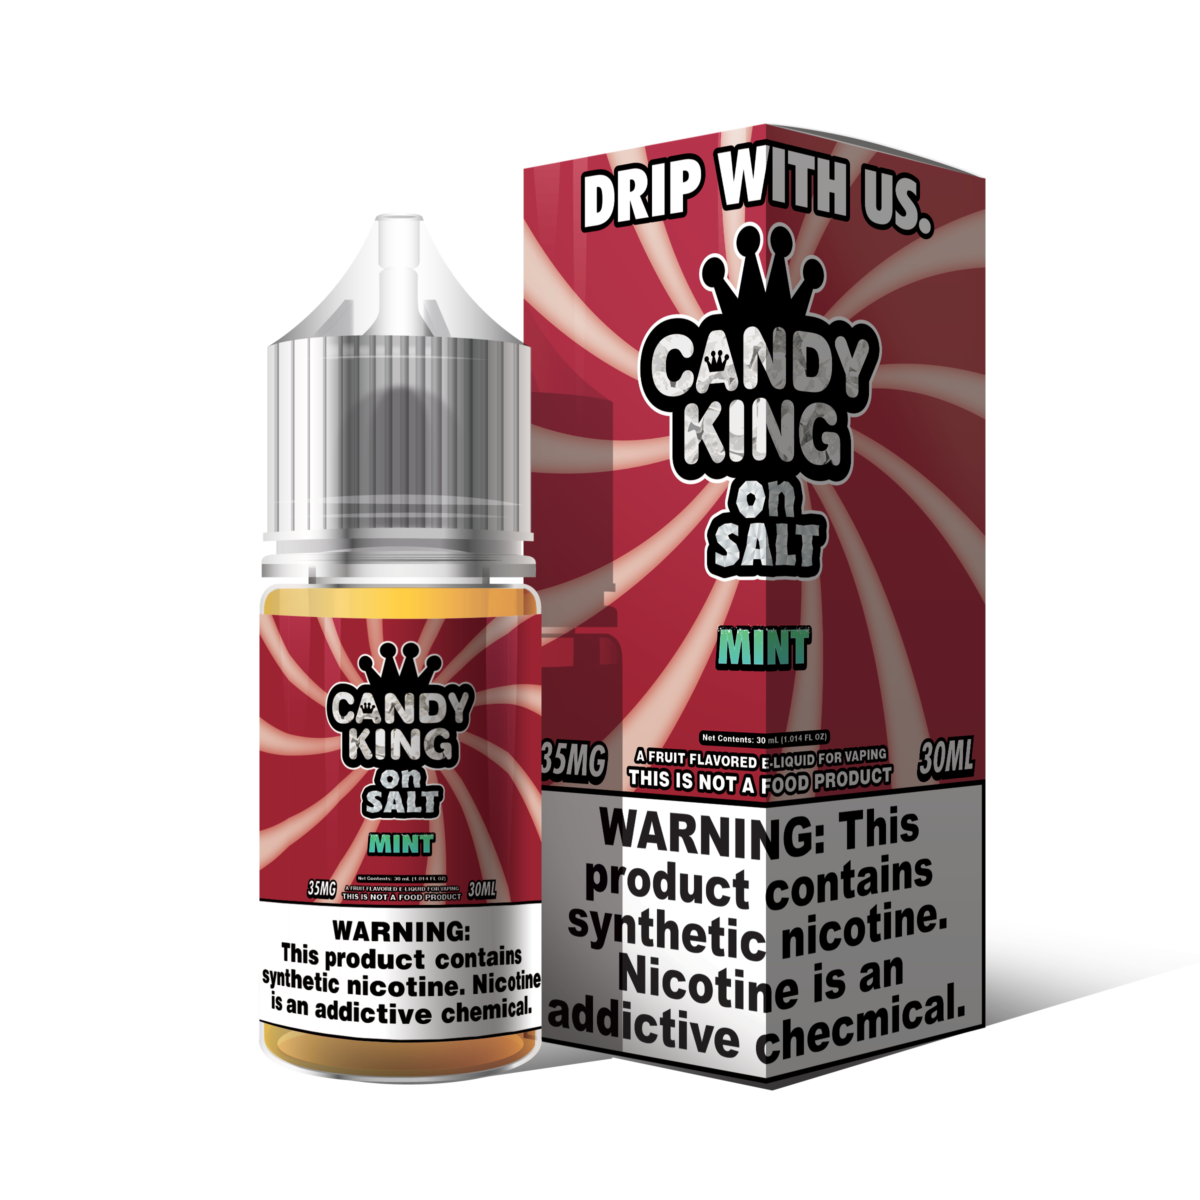 Mint by Candy King on Salt Series 30mL with Packaging